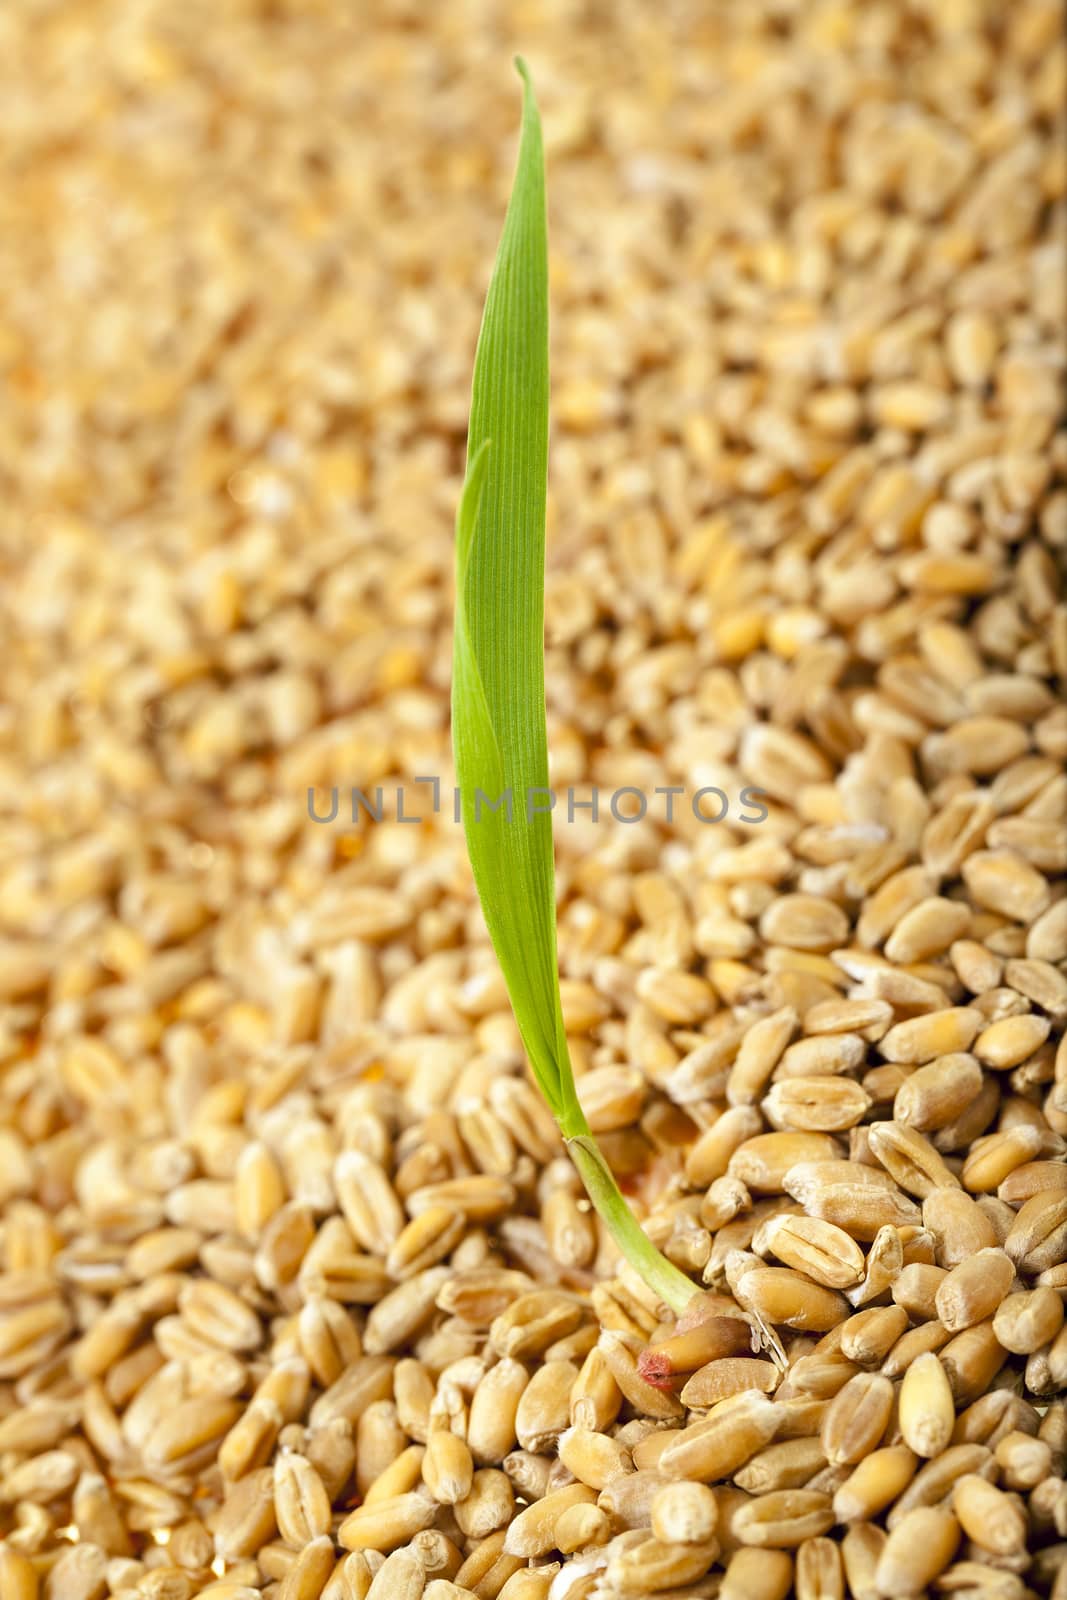   sprouted wheat photographed against the backdrop of a plurality of grains.